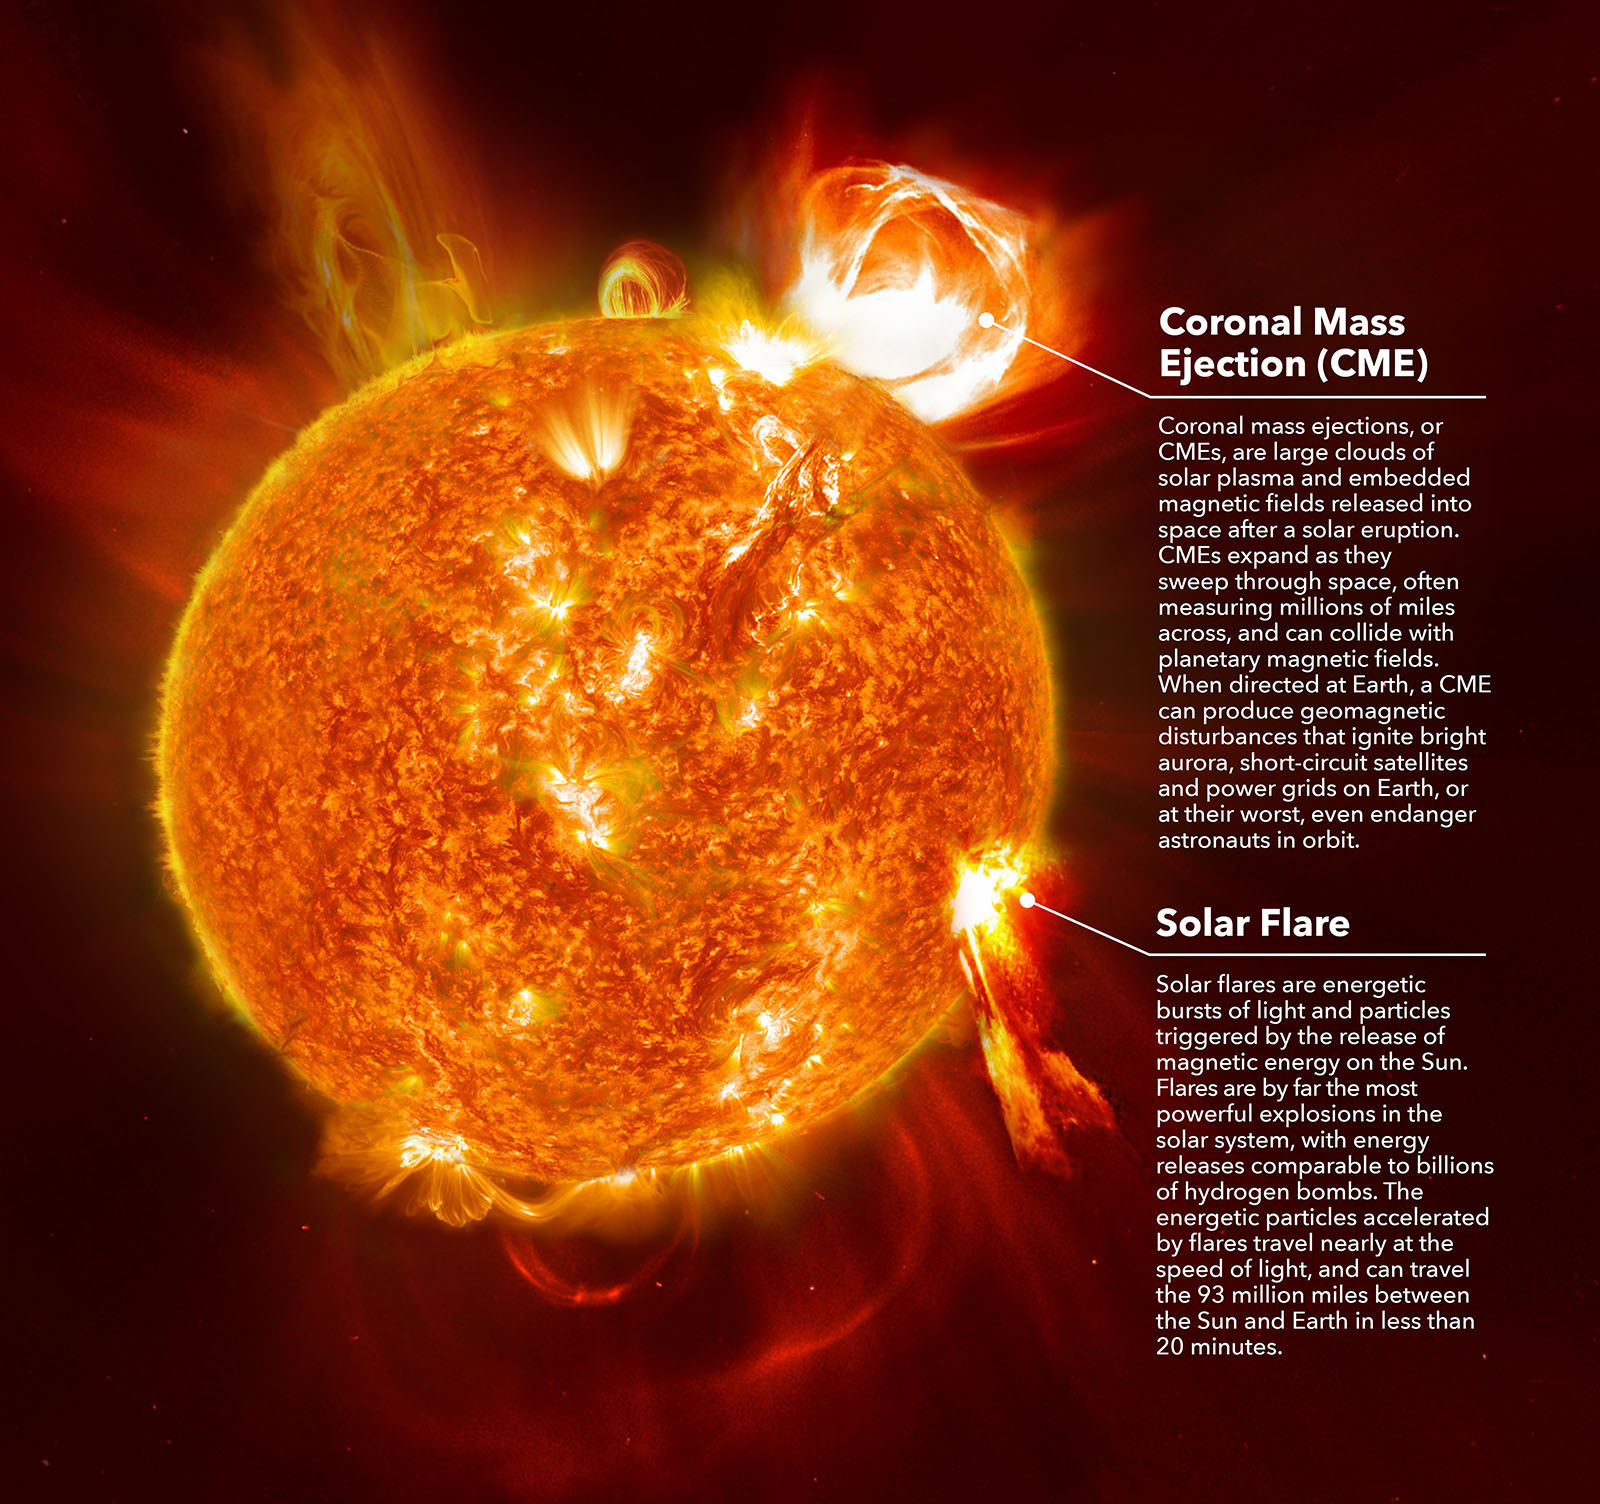 An infographic shows the Sun with a coronal mass ejection at the top and a solar flare in the lower right. Words on the graphic label and describe each type of phenomenon.